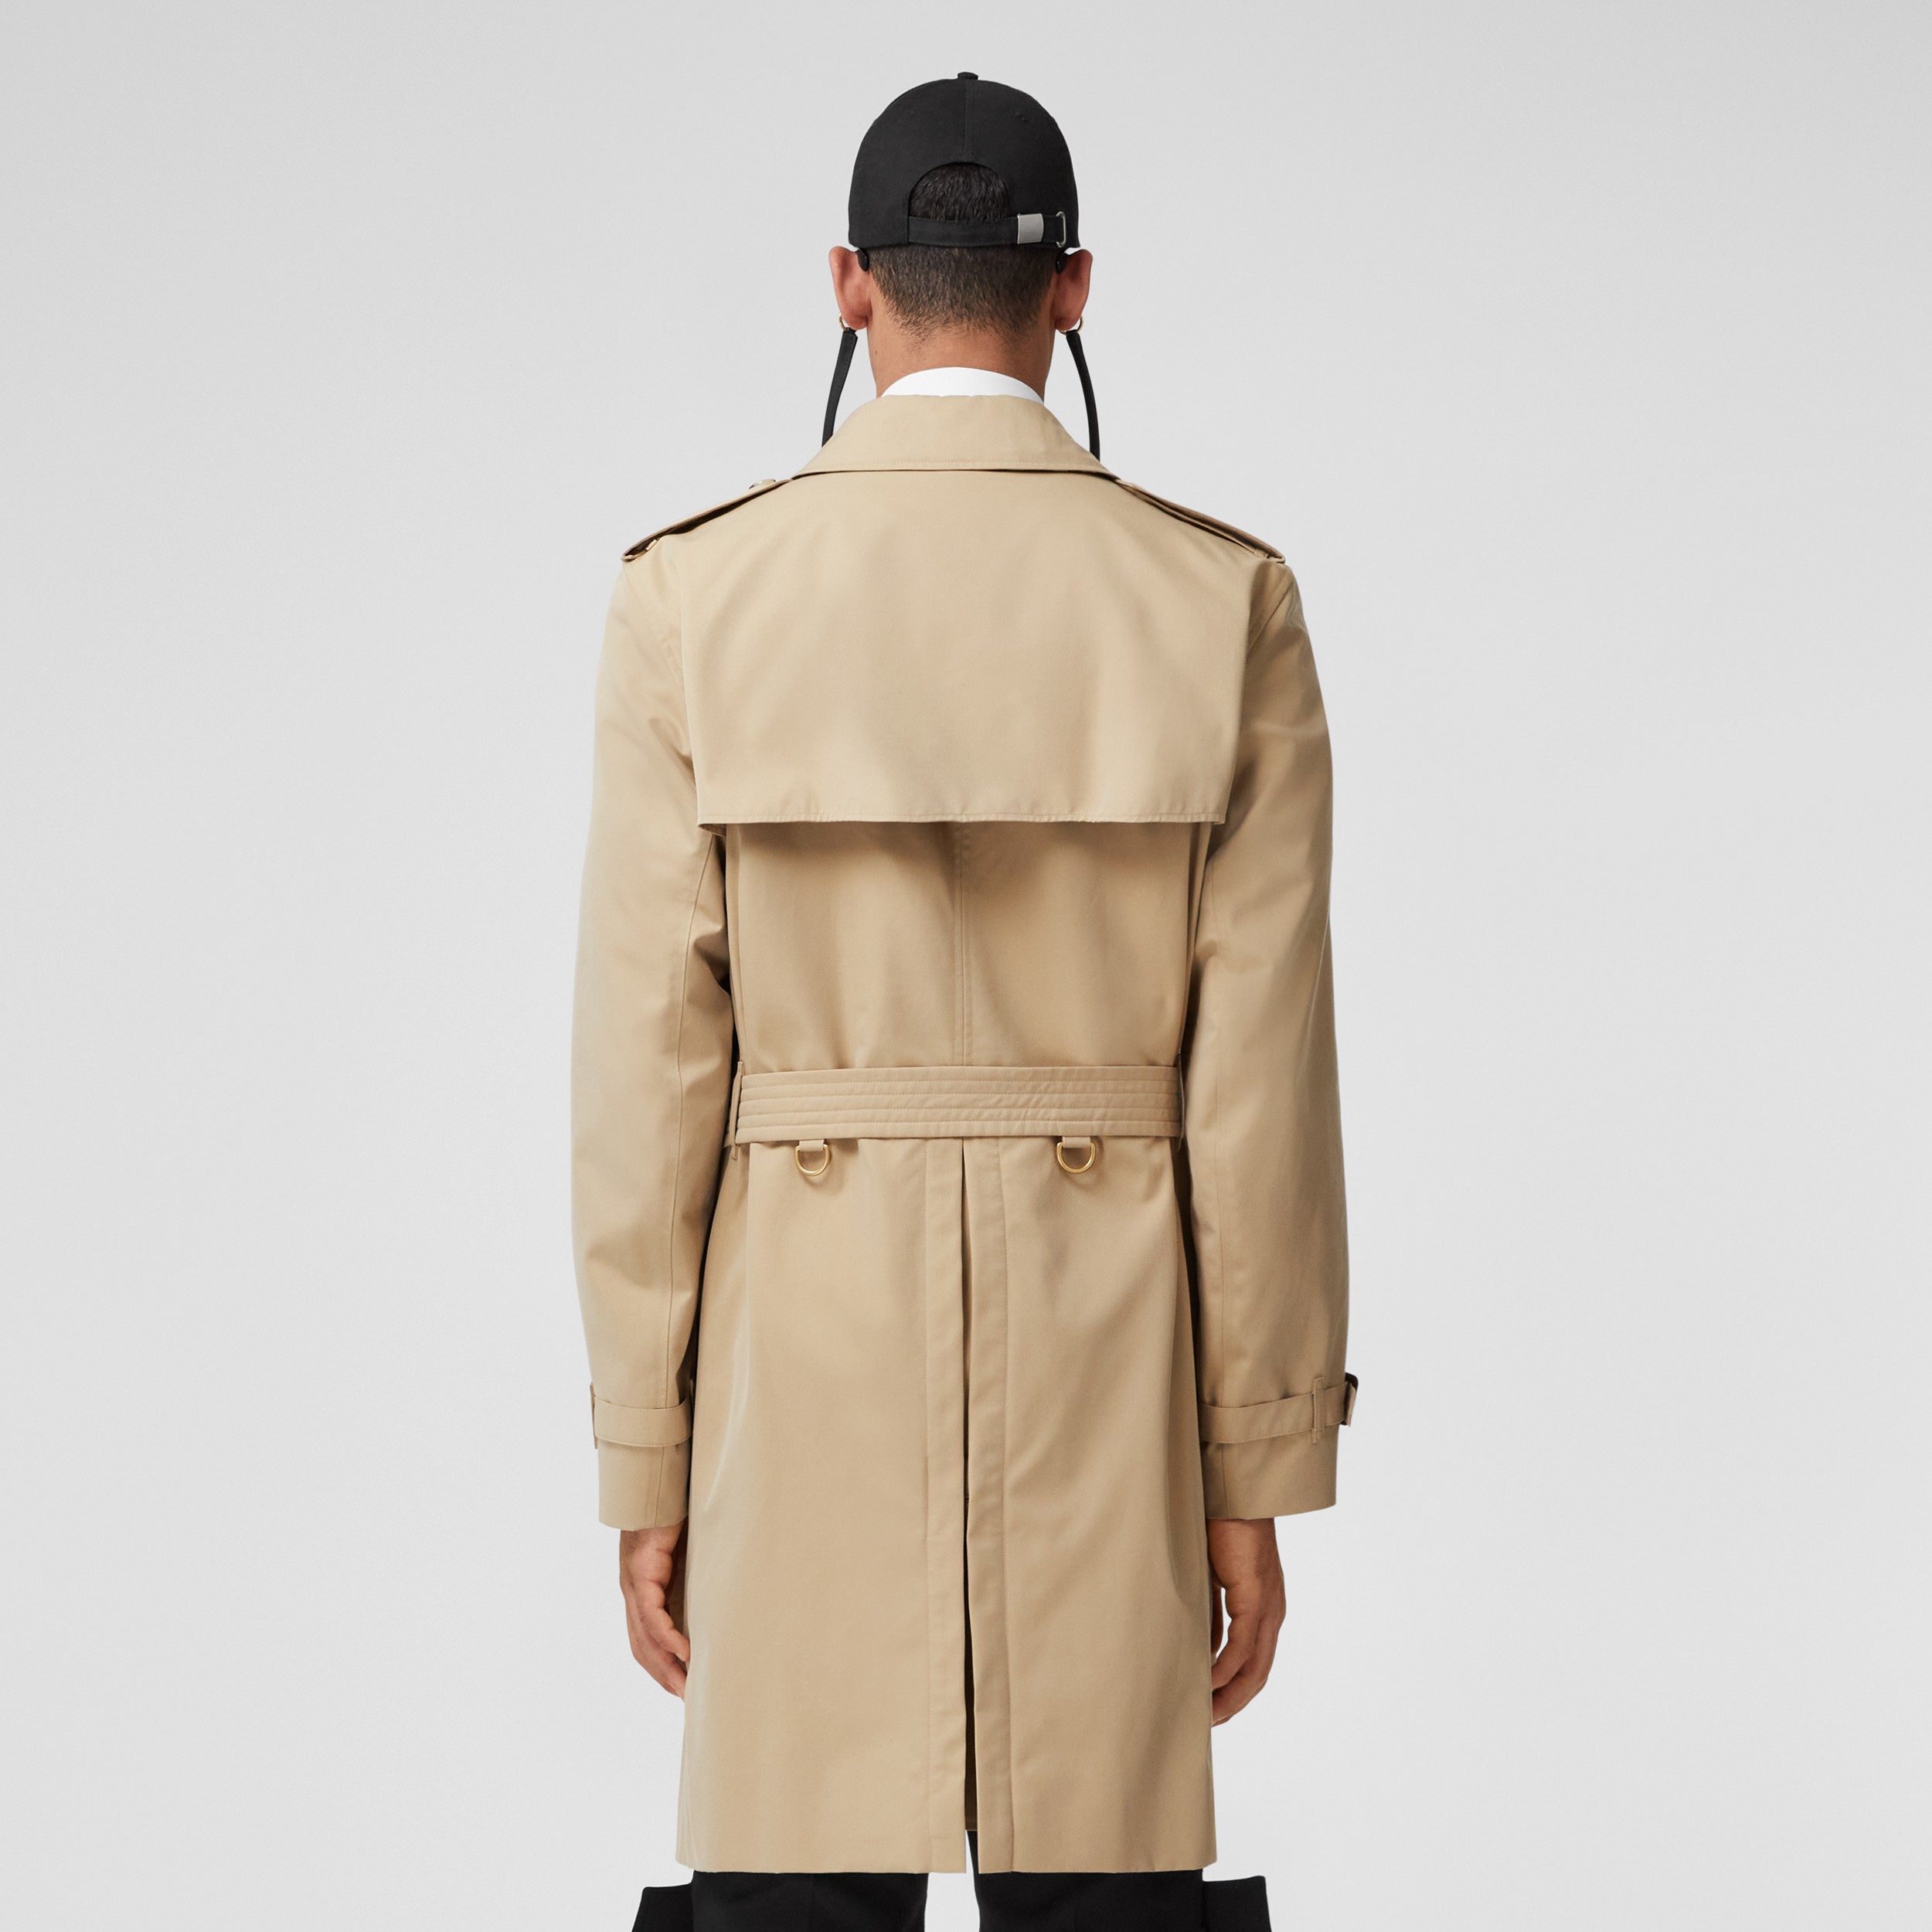 for Men Burberry Cotton Mw Kensington Trench Coat in Beige Mens Clothing Coats Raincoats and trench coats Natural 